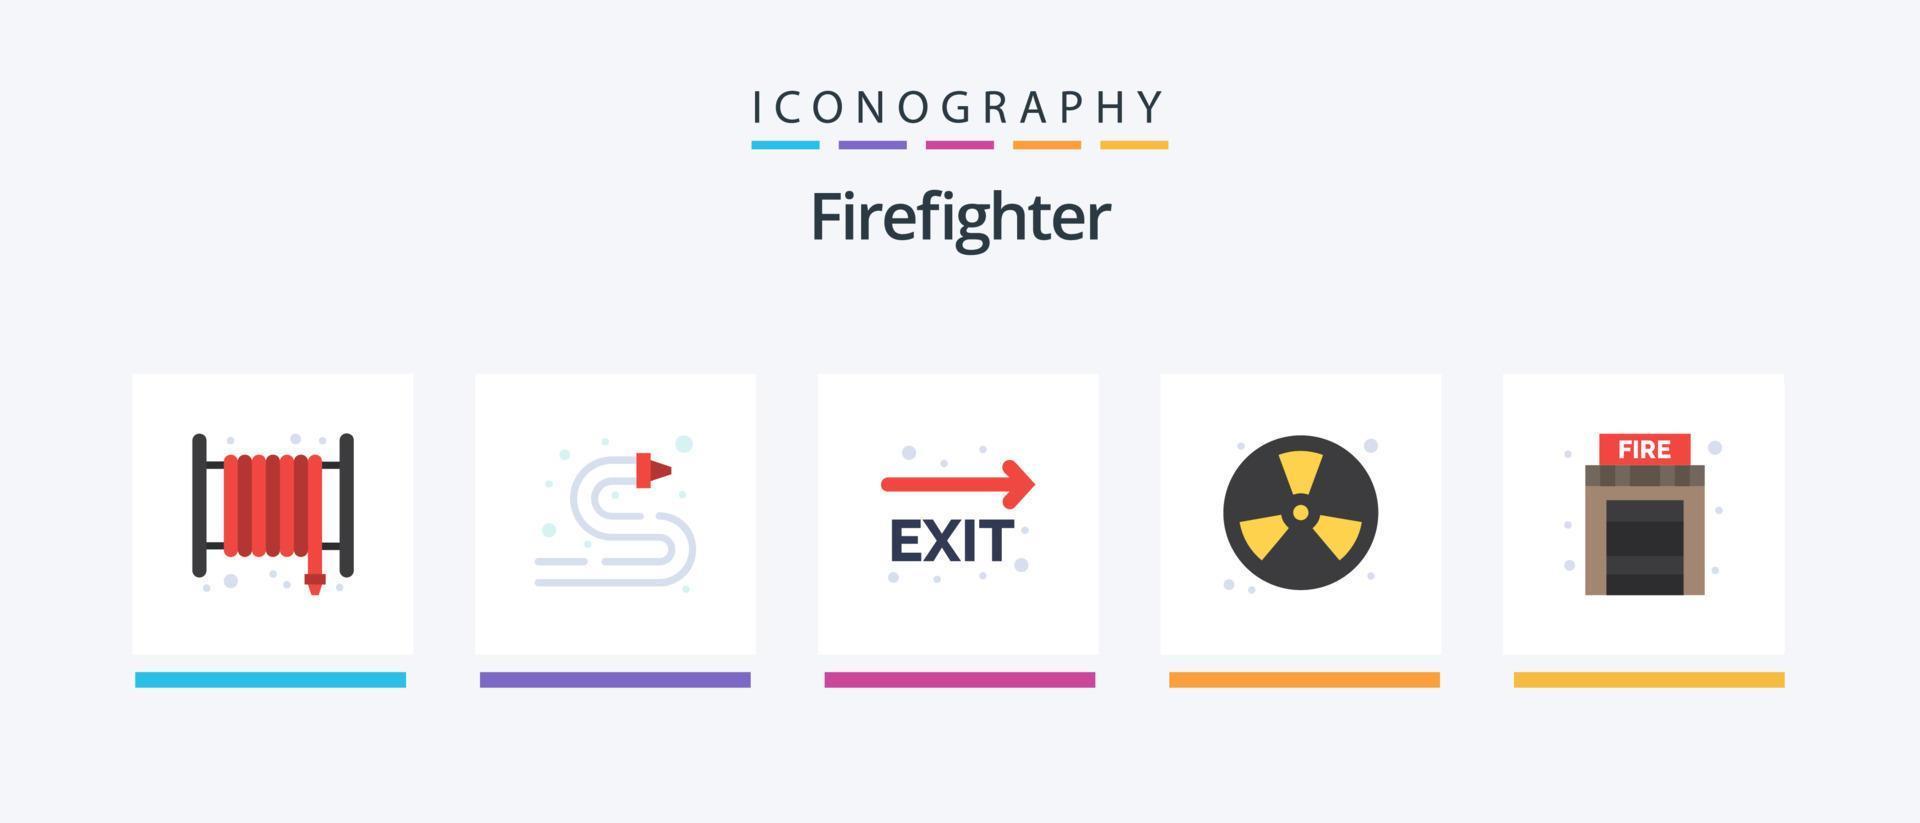 Firefighter Flat 5 Icon Pack Including fire. fireman. exit. fire. burn. Creative Icons Design vector